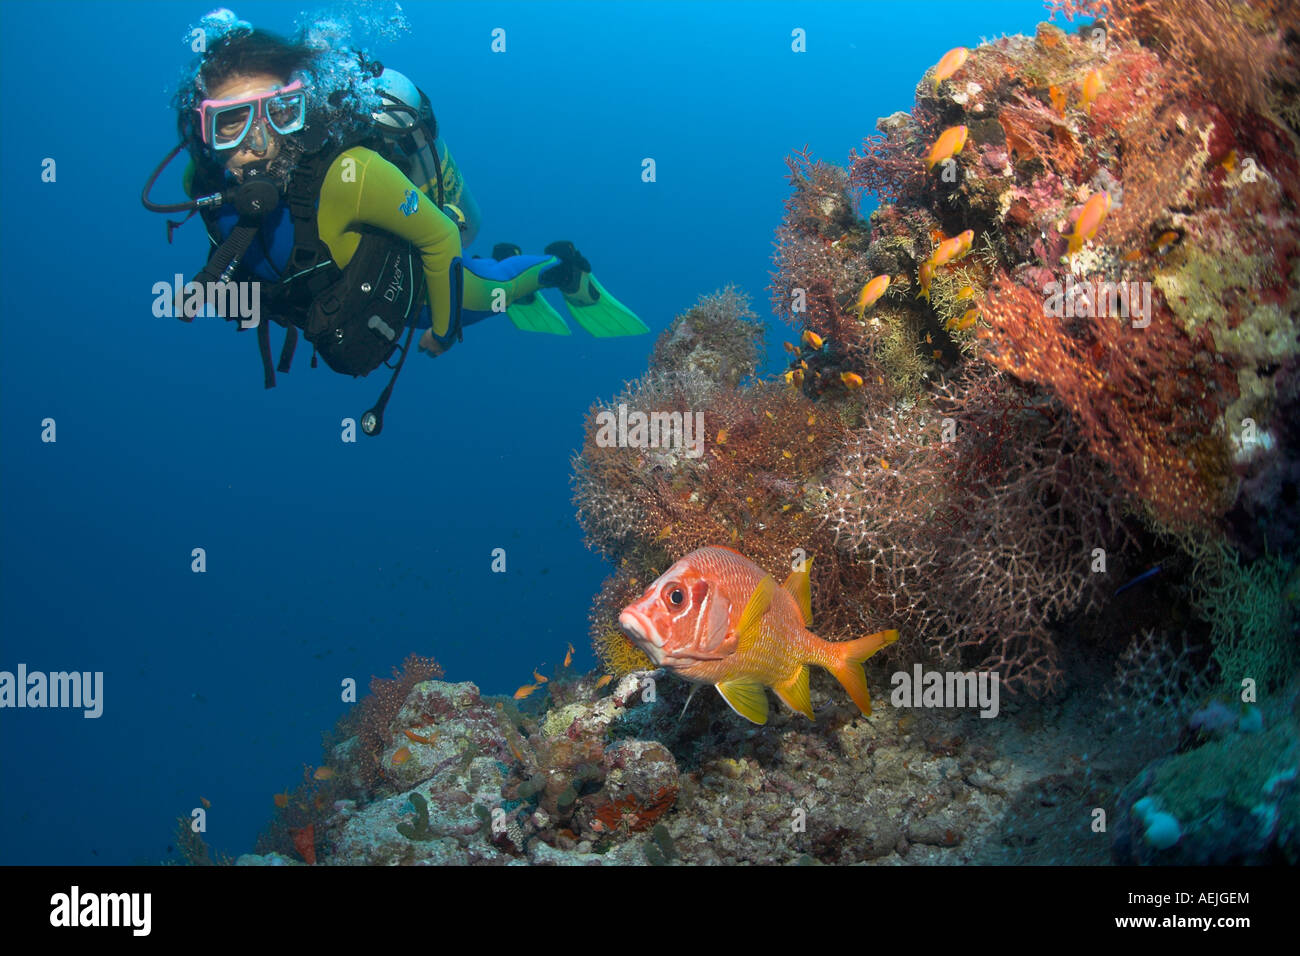 Diver observing a Giant squirrelfish (Sargocentron spiniferum) Stock Photo